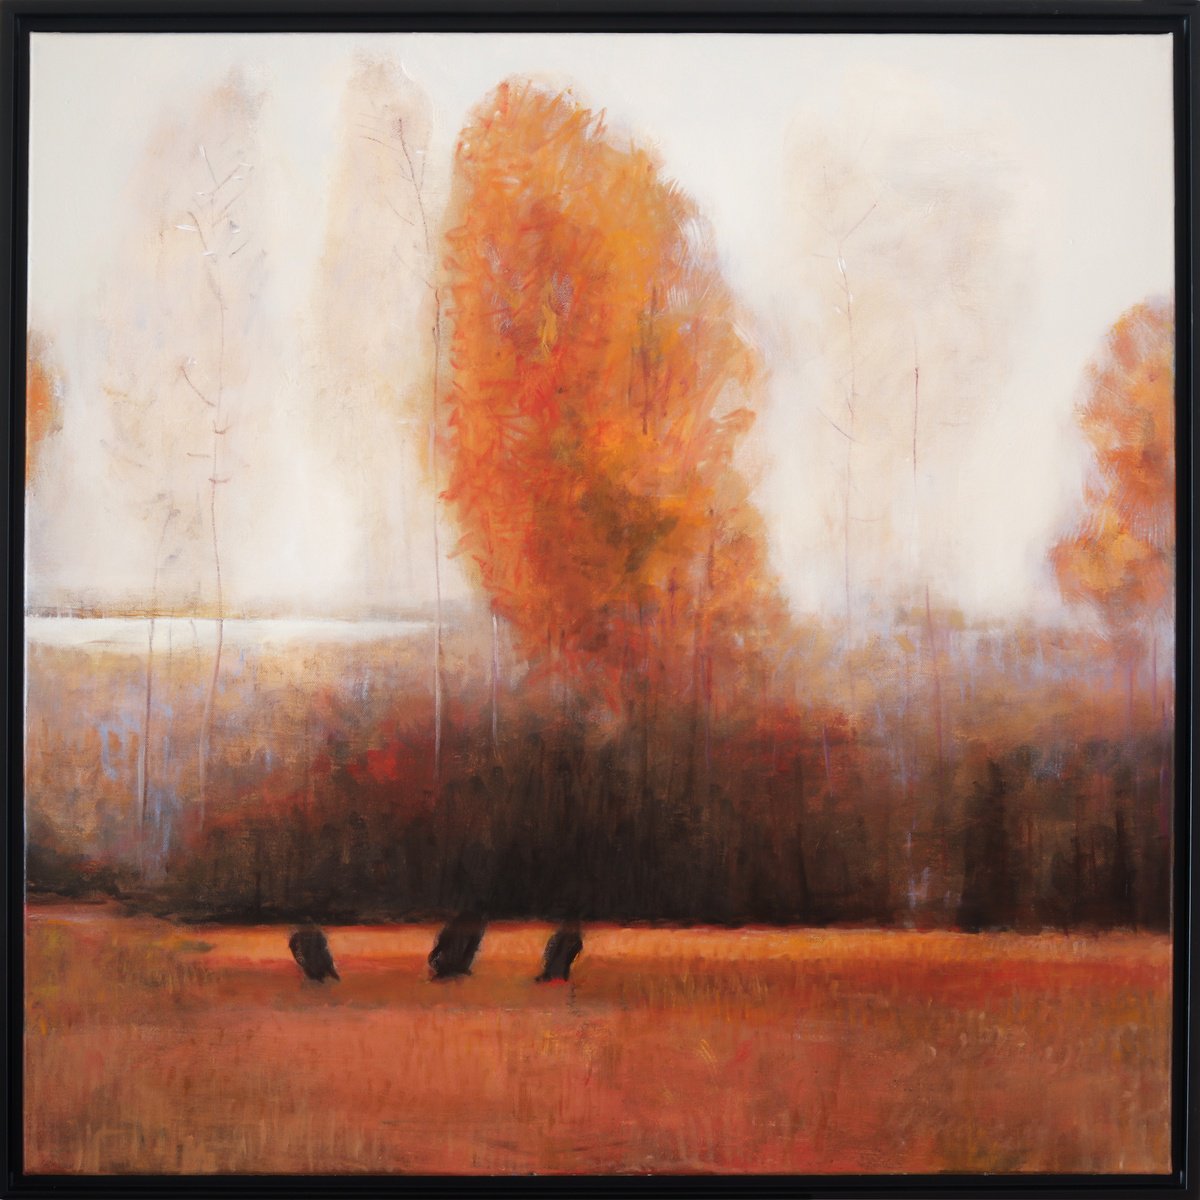 When the leaves shed their wings 30x30 inch 76x76 cm by Bo Kravchenko by Bo Kravchenko